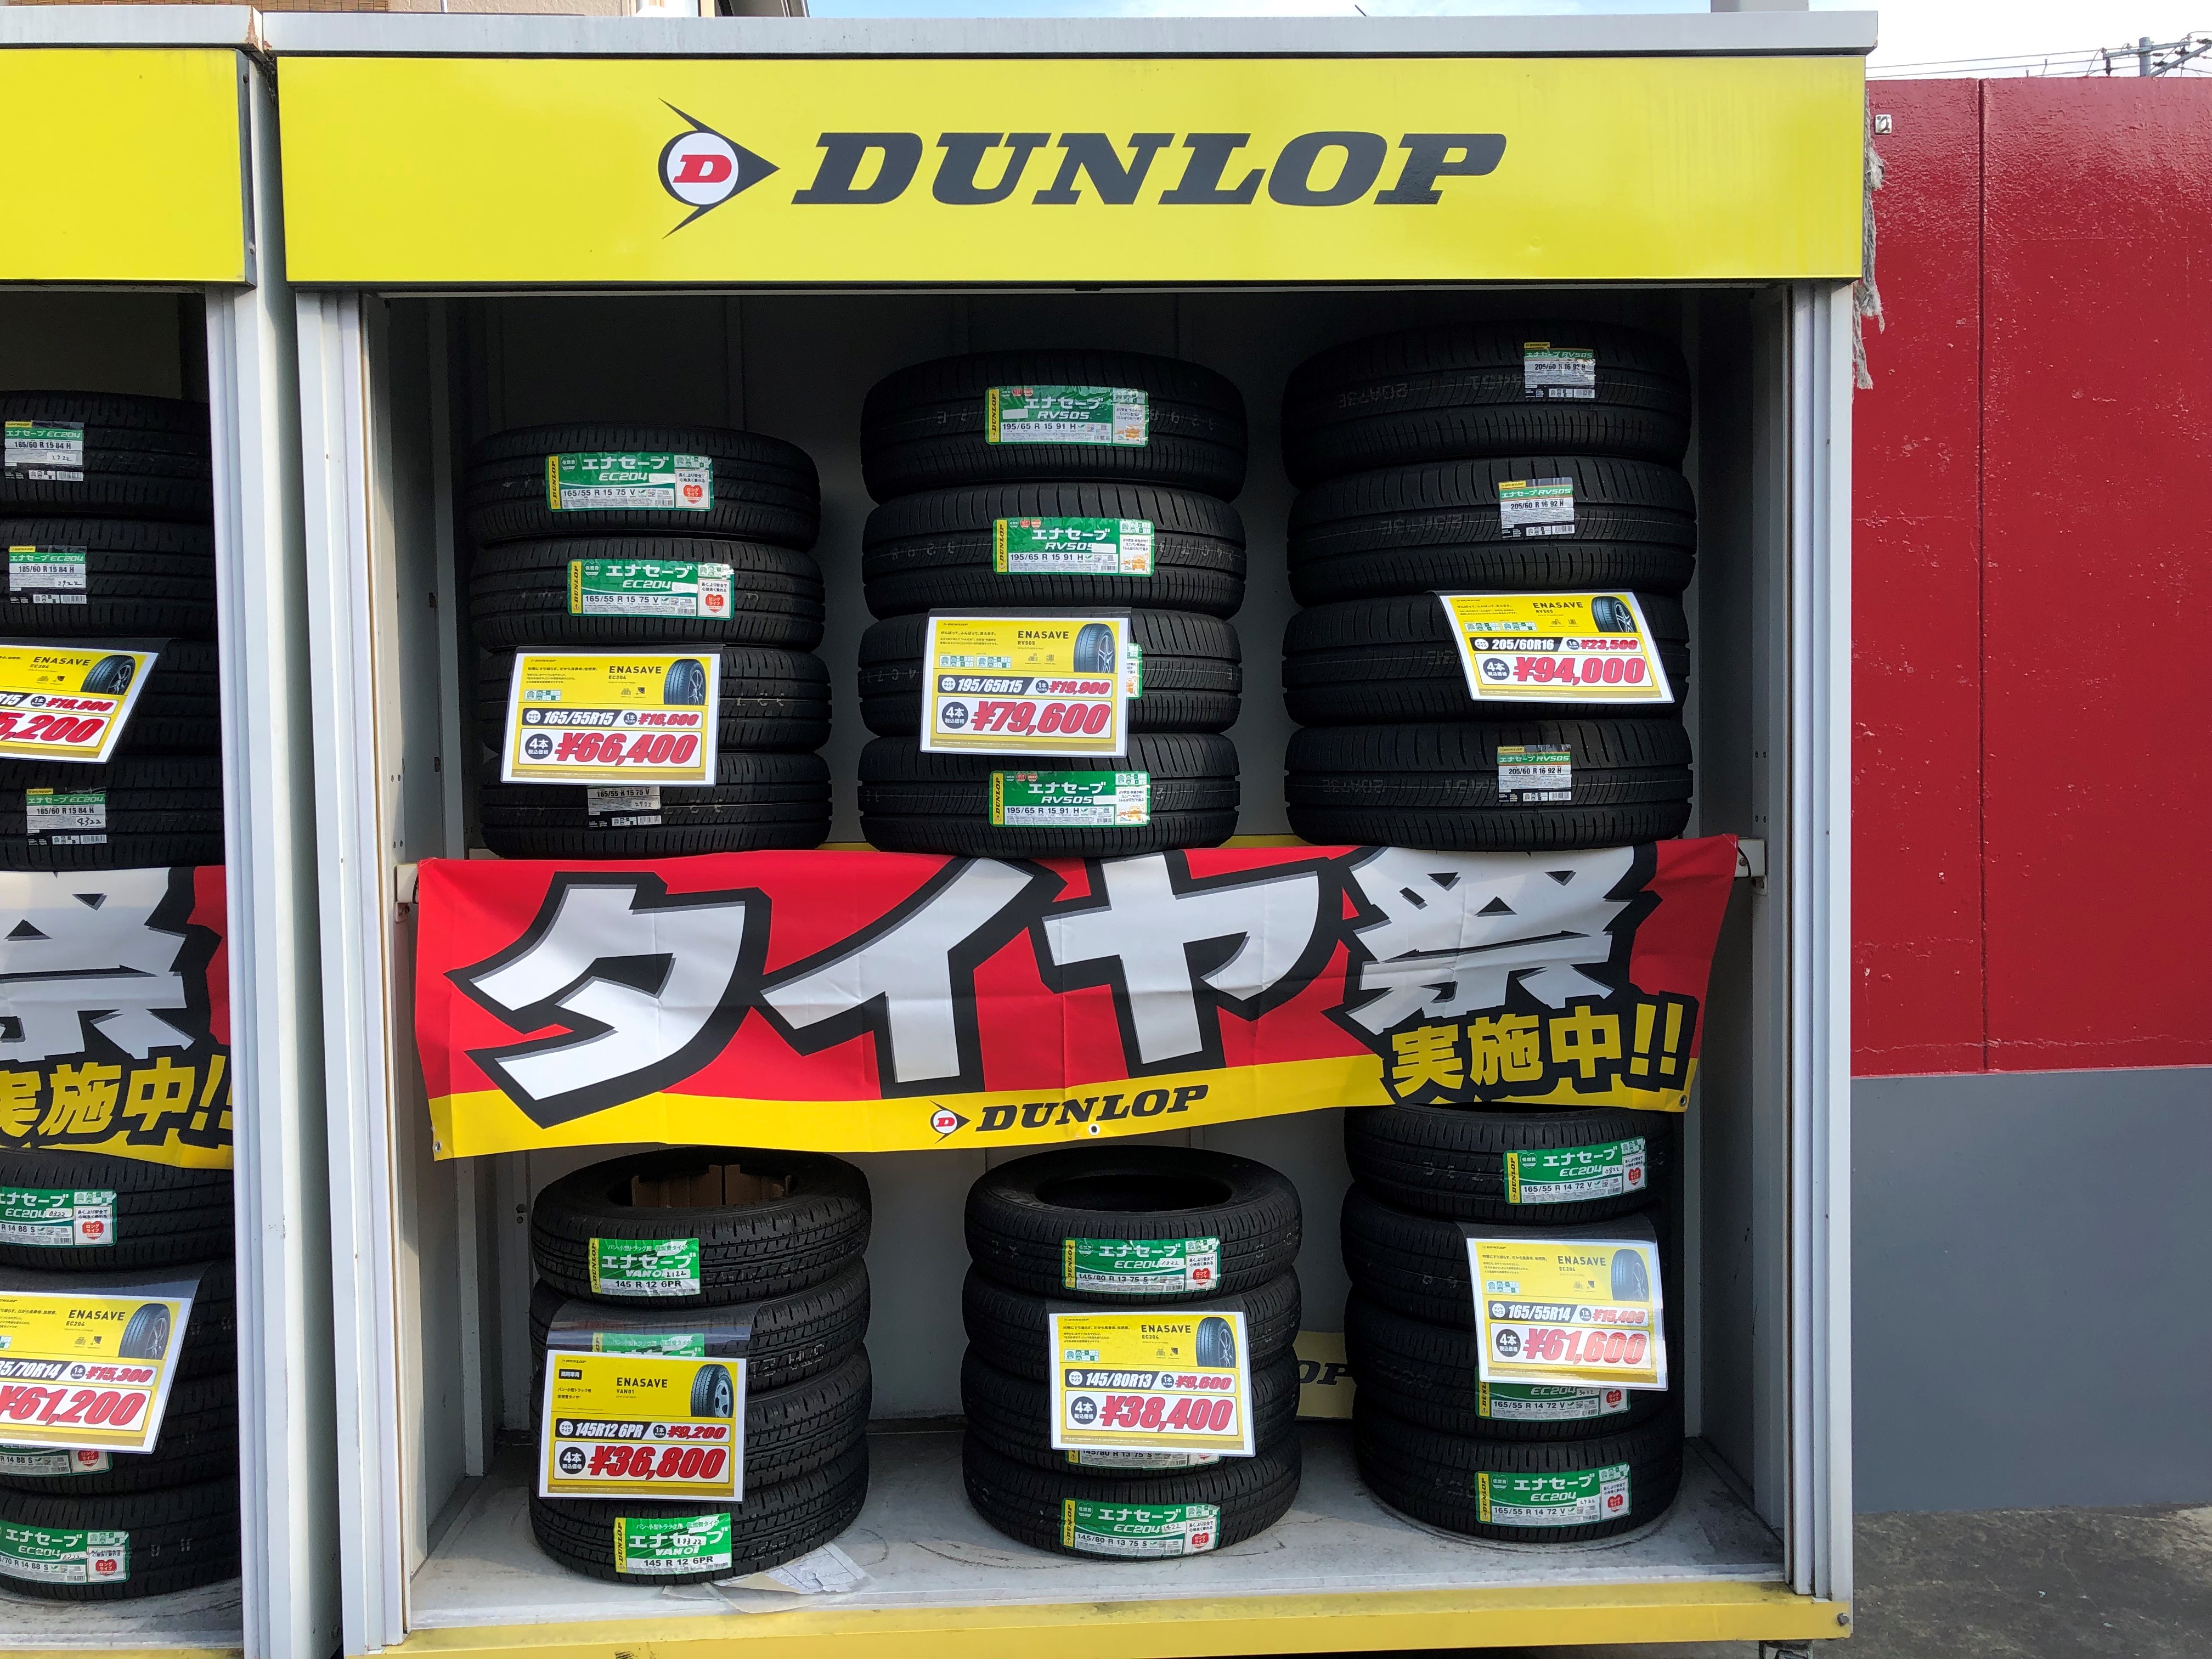 Images ENEOS Dr.Drive京阪橋本店(ENEOSフロンティア)